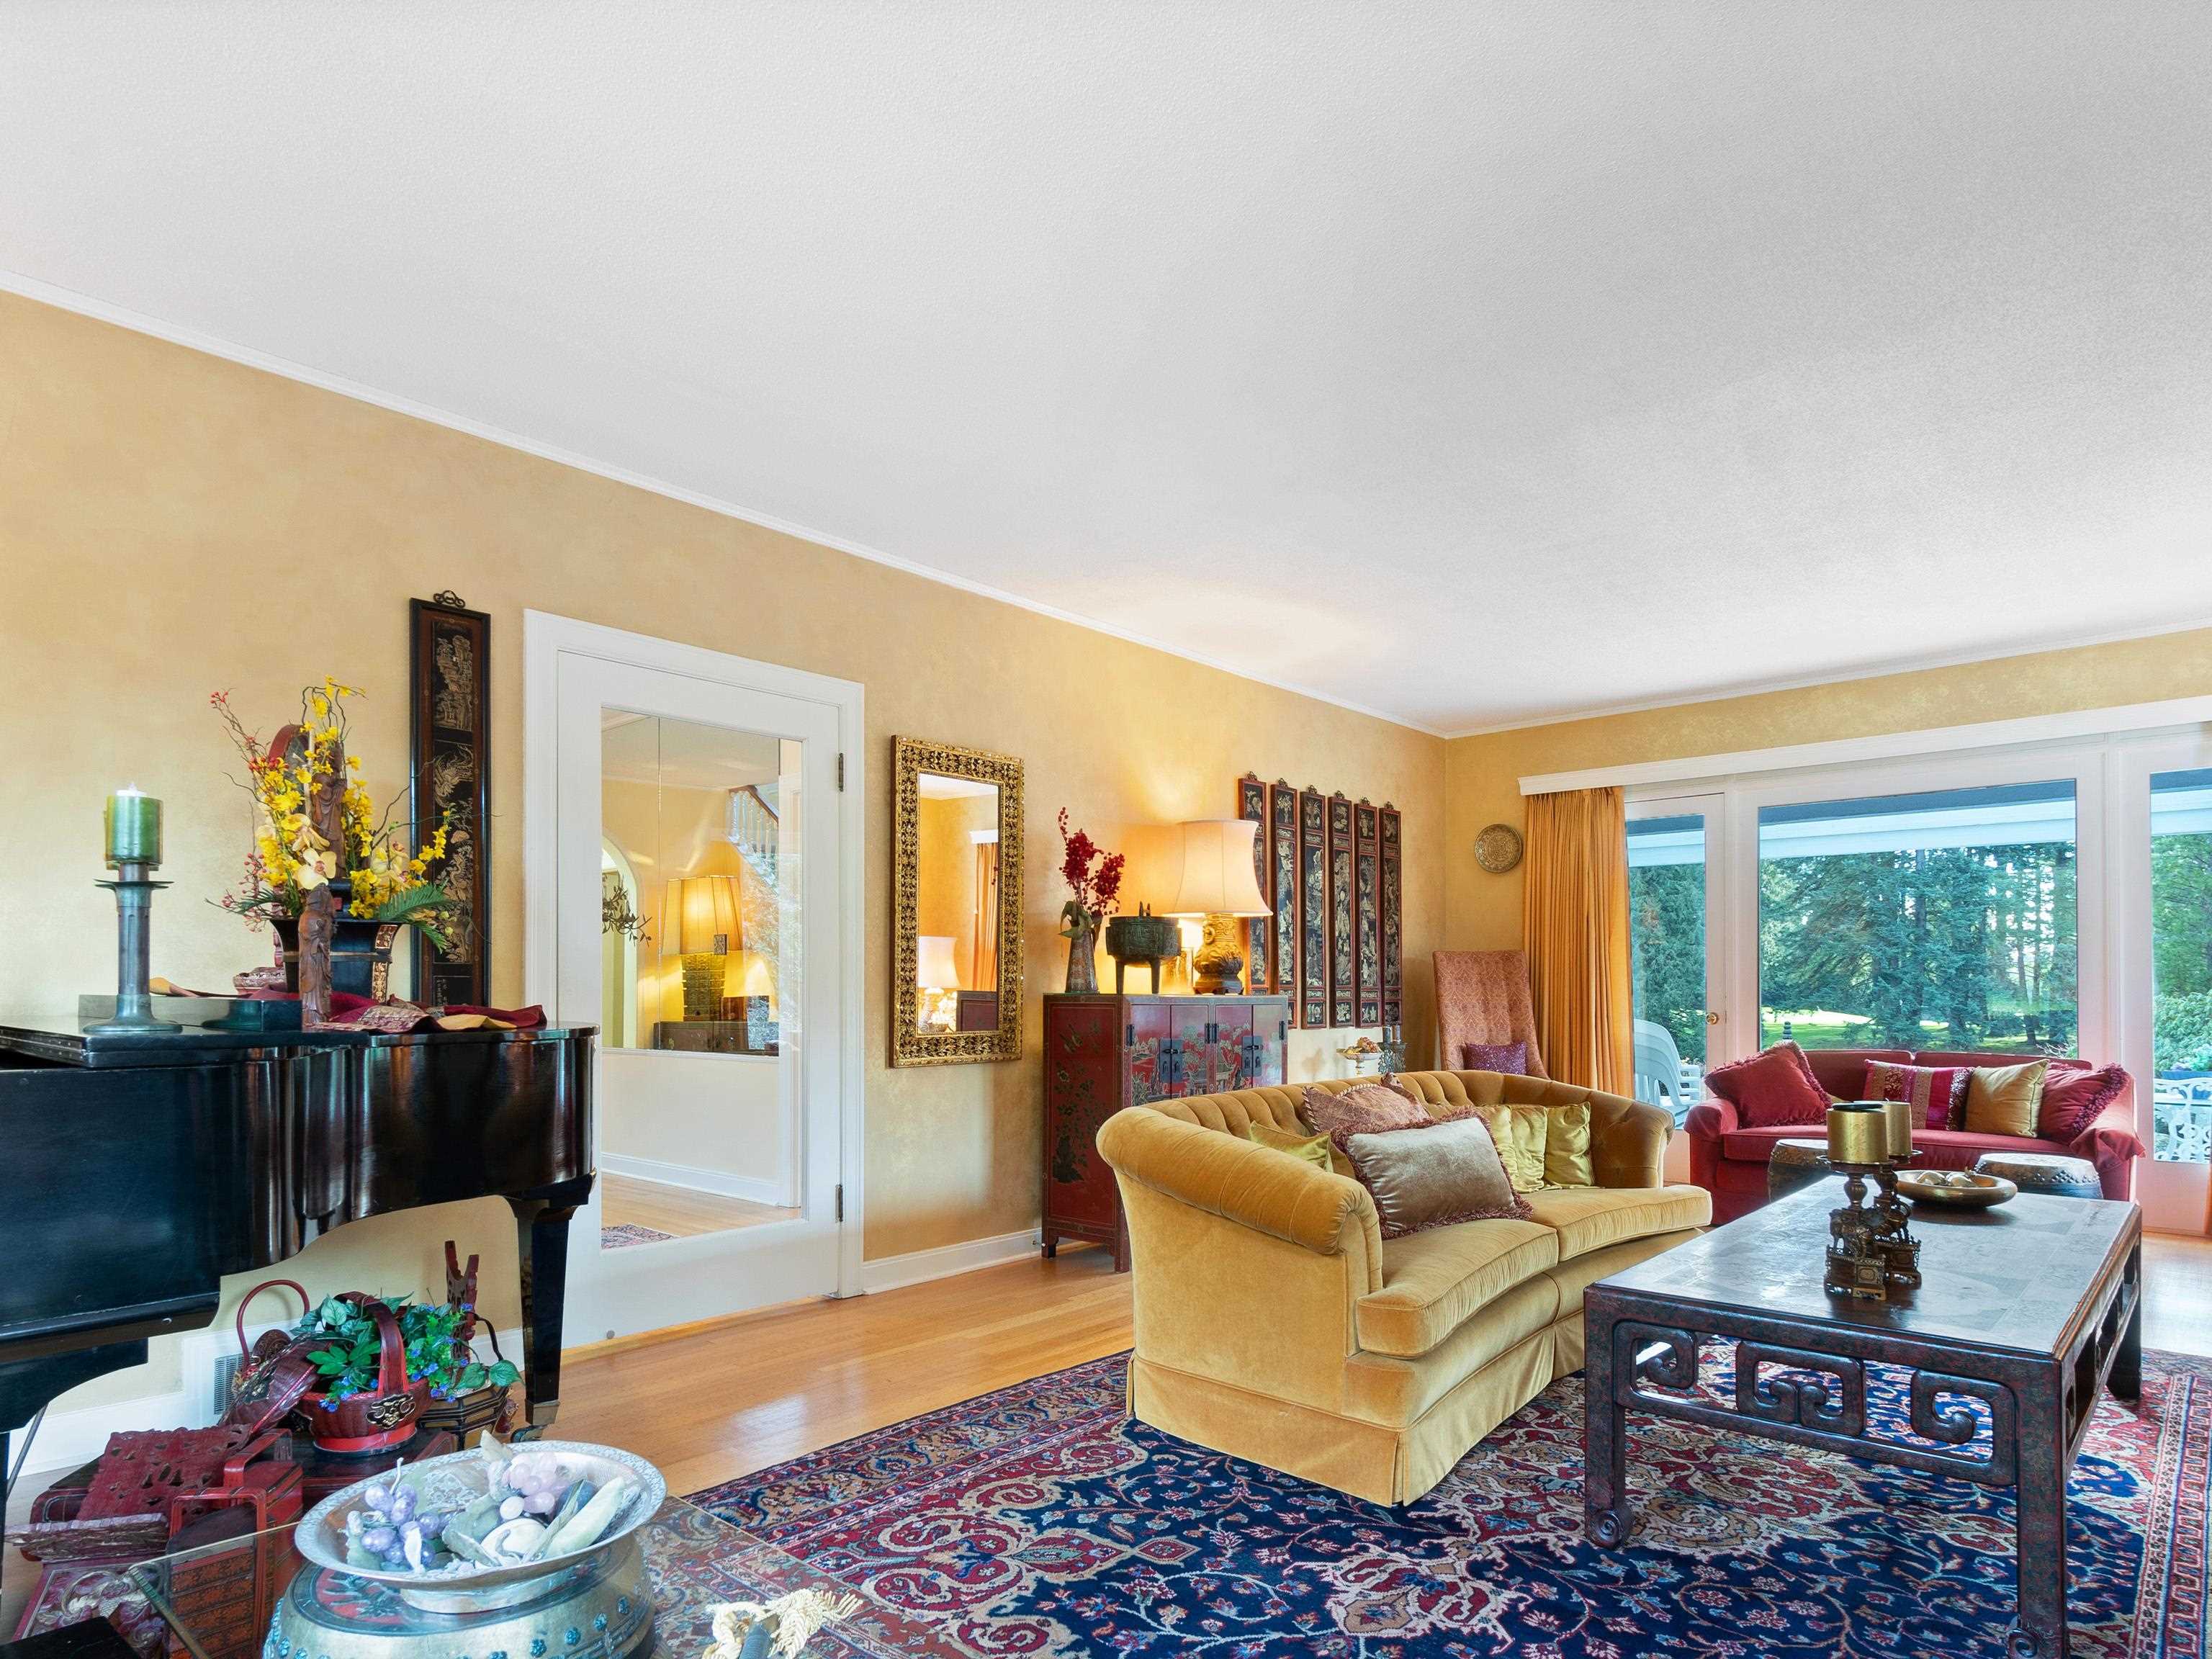 Listing image of 550 SOUTHBOROUGH DRIVE